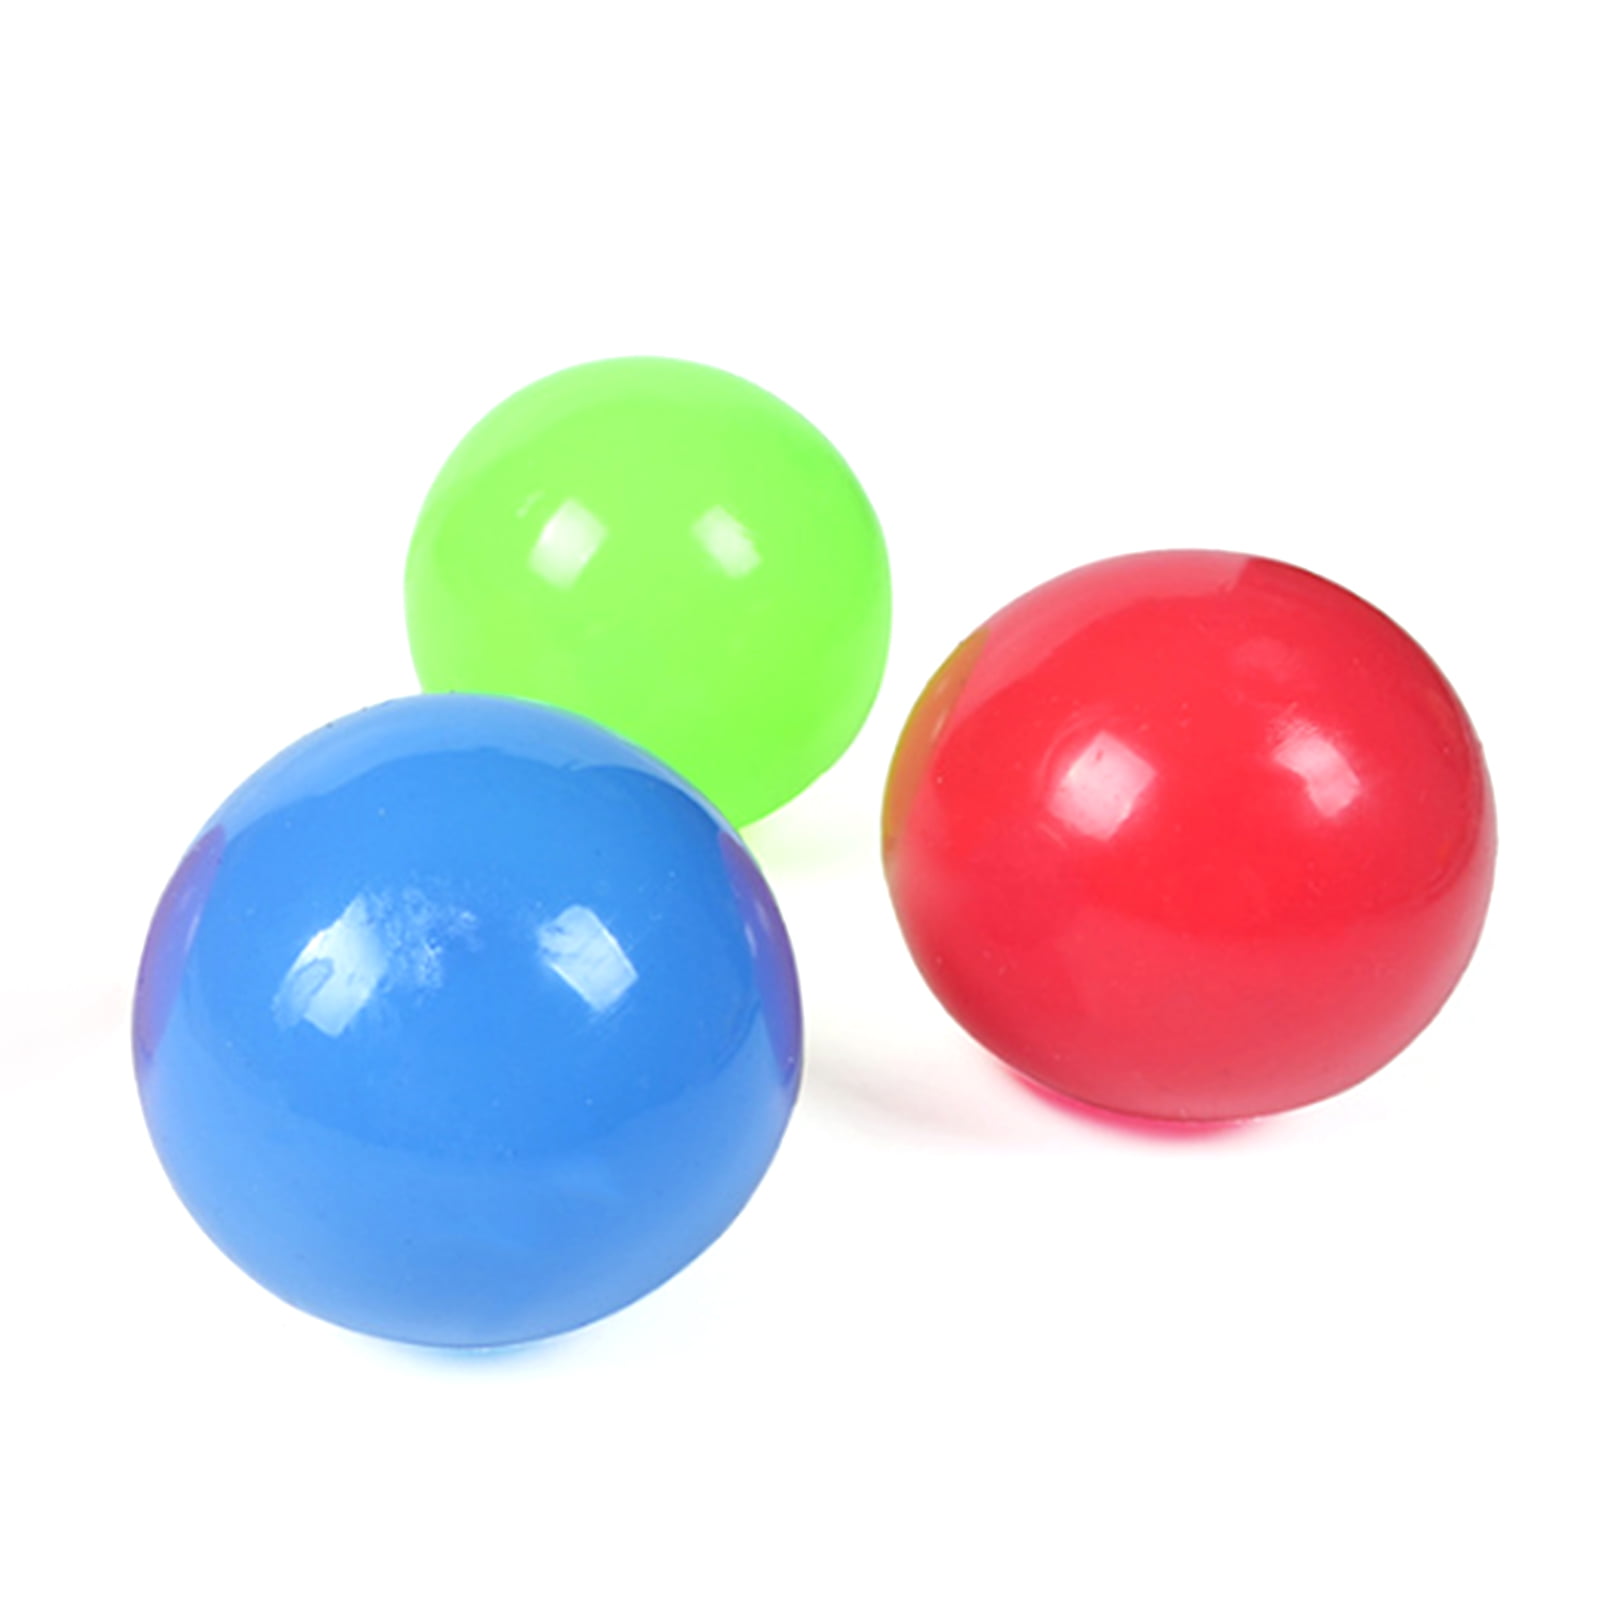 Fluorescent Sticky Wall Ball Sticky Target Ball Decompression Toy Kid Child Gift 